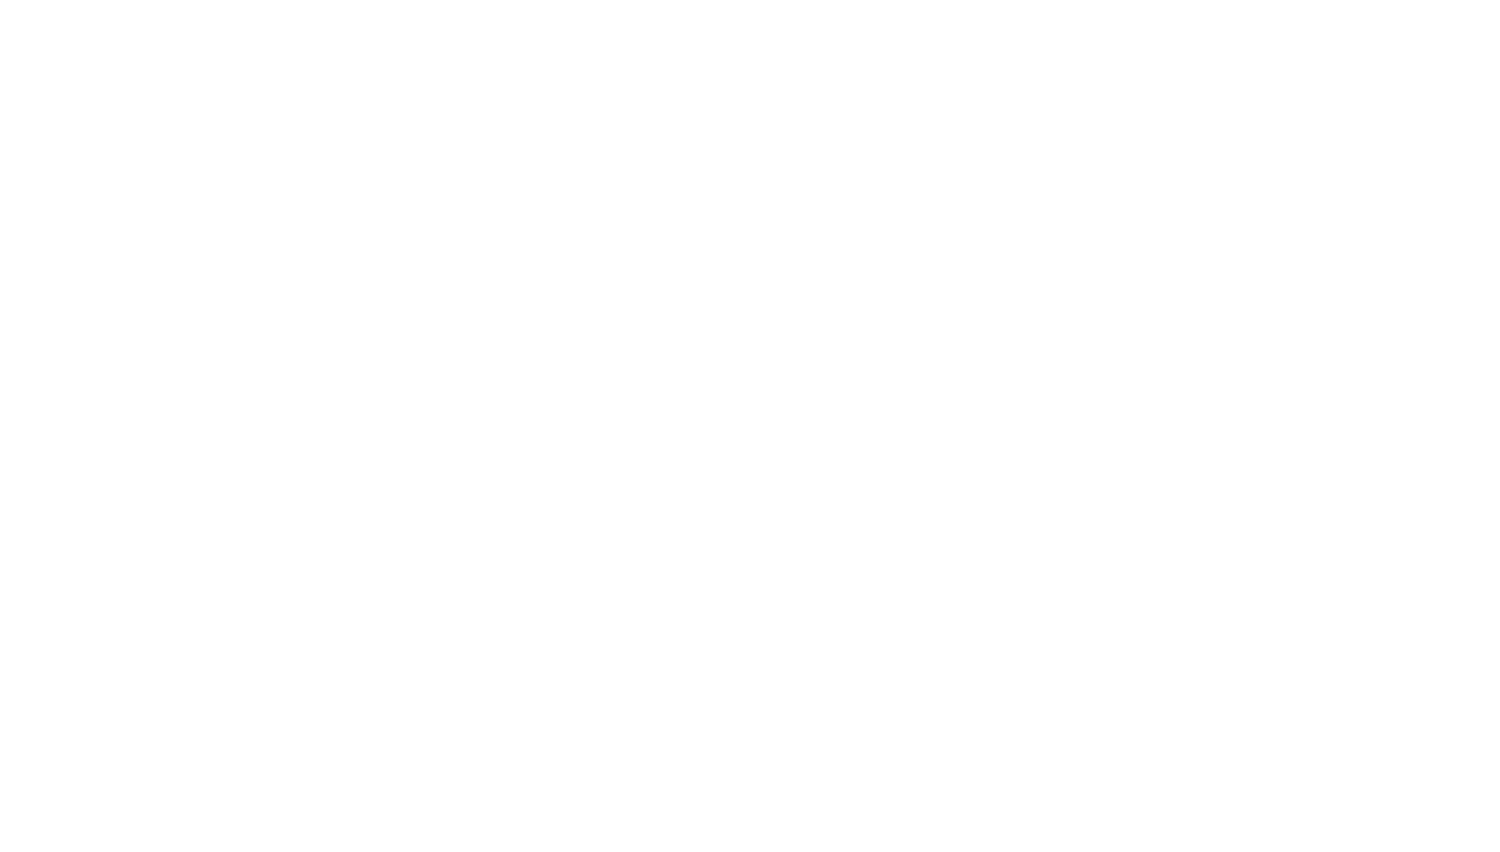 All SHED RAIN Umbrellas Come with a limited Lifetime Warranty